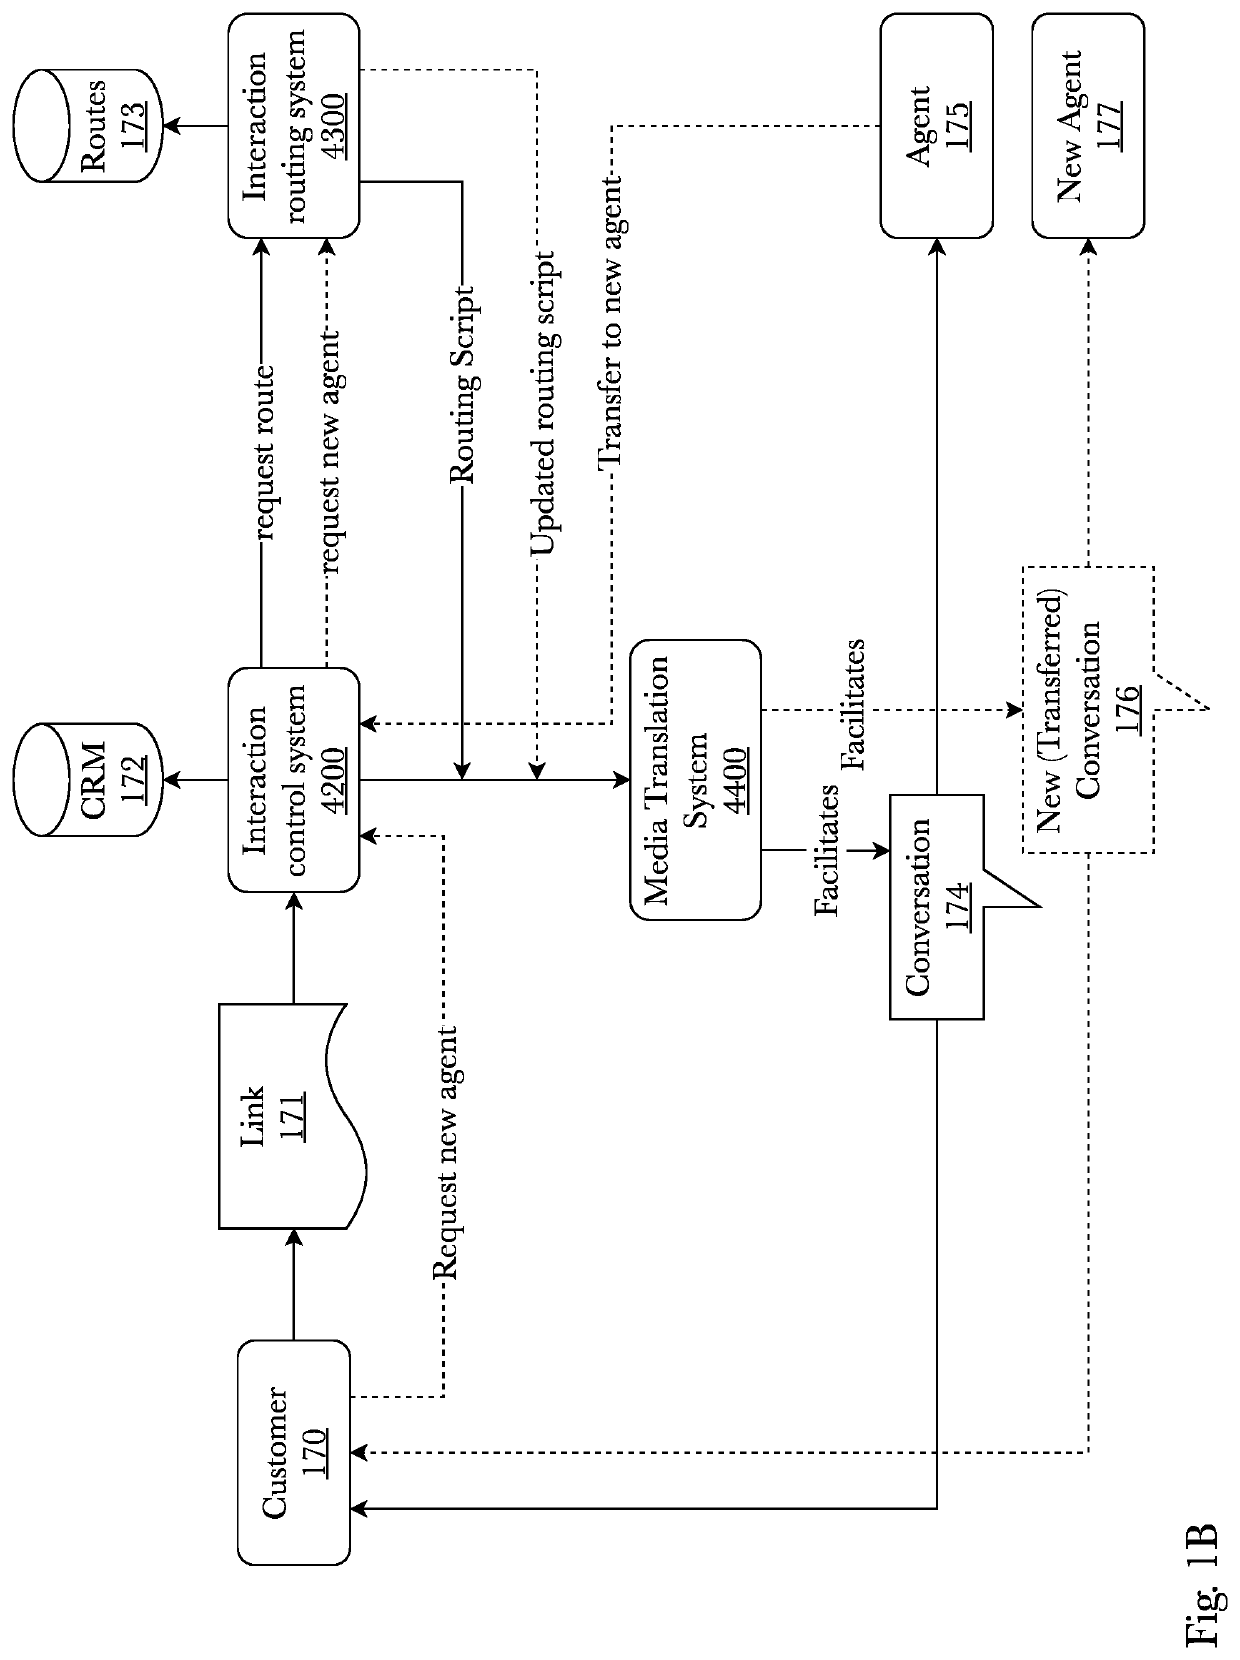 System and method for omnichannel text-based communication system with web chat-text message conversion